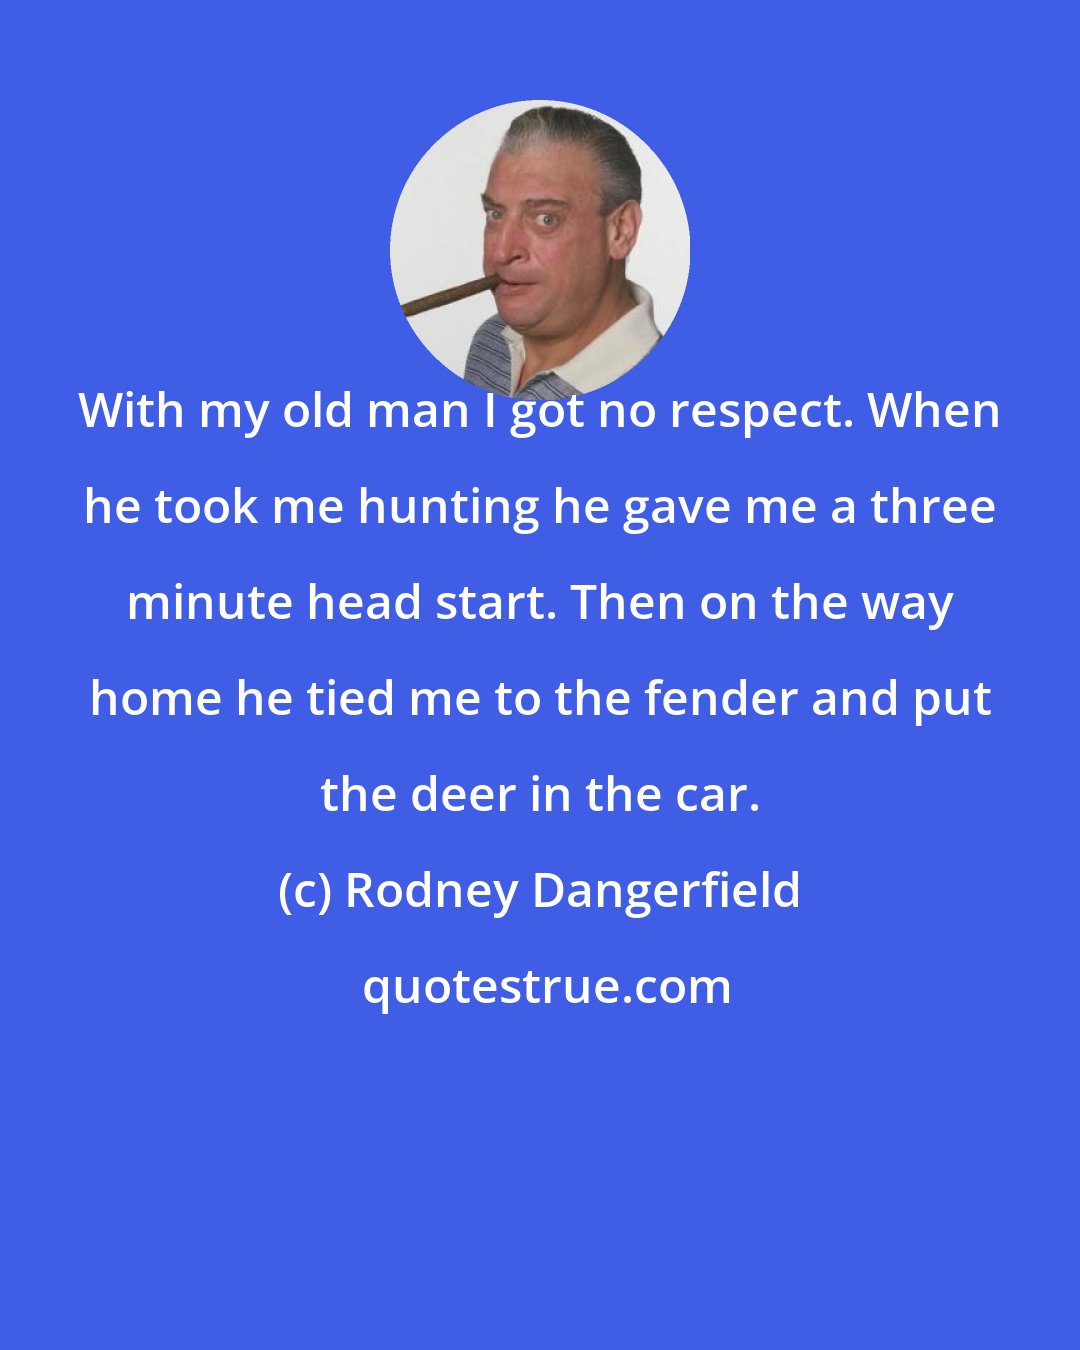 Rodney Dangerfield: With my old man I got no respect. When he took me hunting he gave me a three minute head start. Then on the way home he tied me to the fender and put the deer in the car.